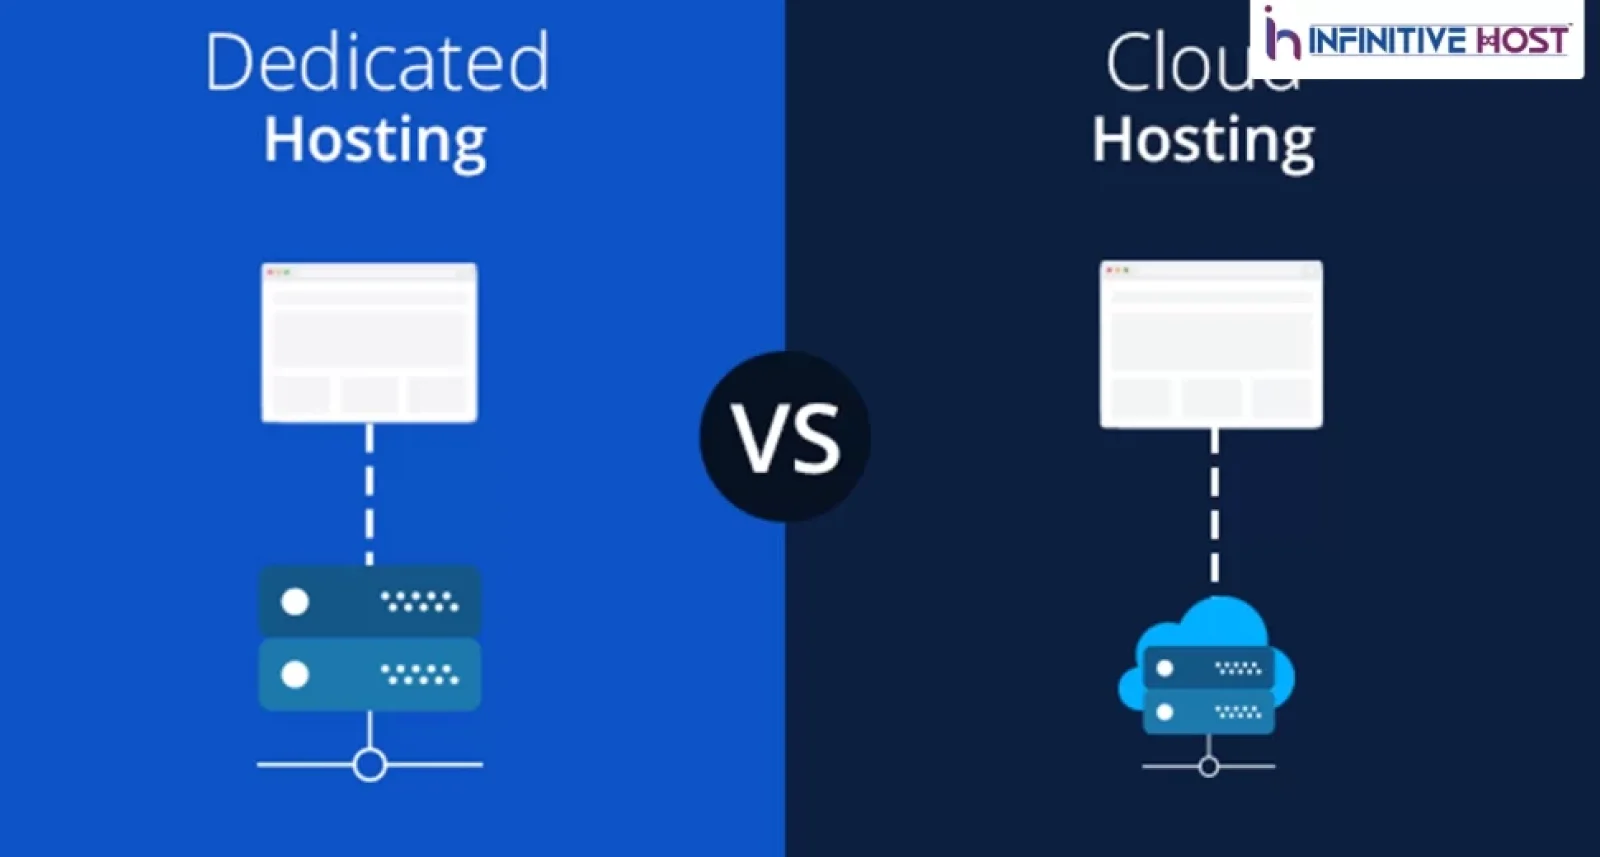 Difference Between Dedicated Hosting and Cloud Hosting?